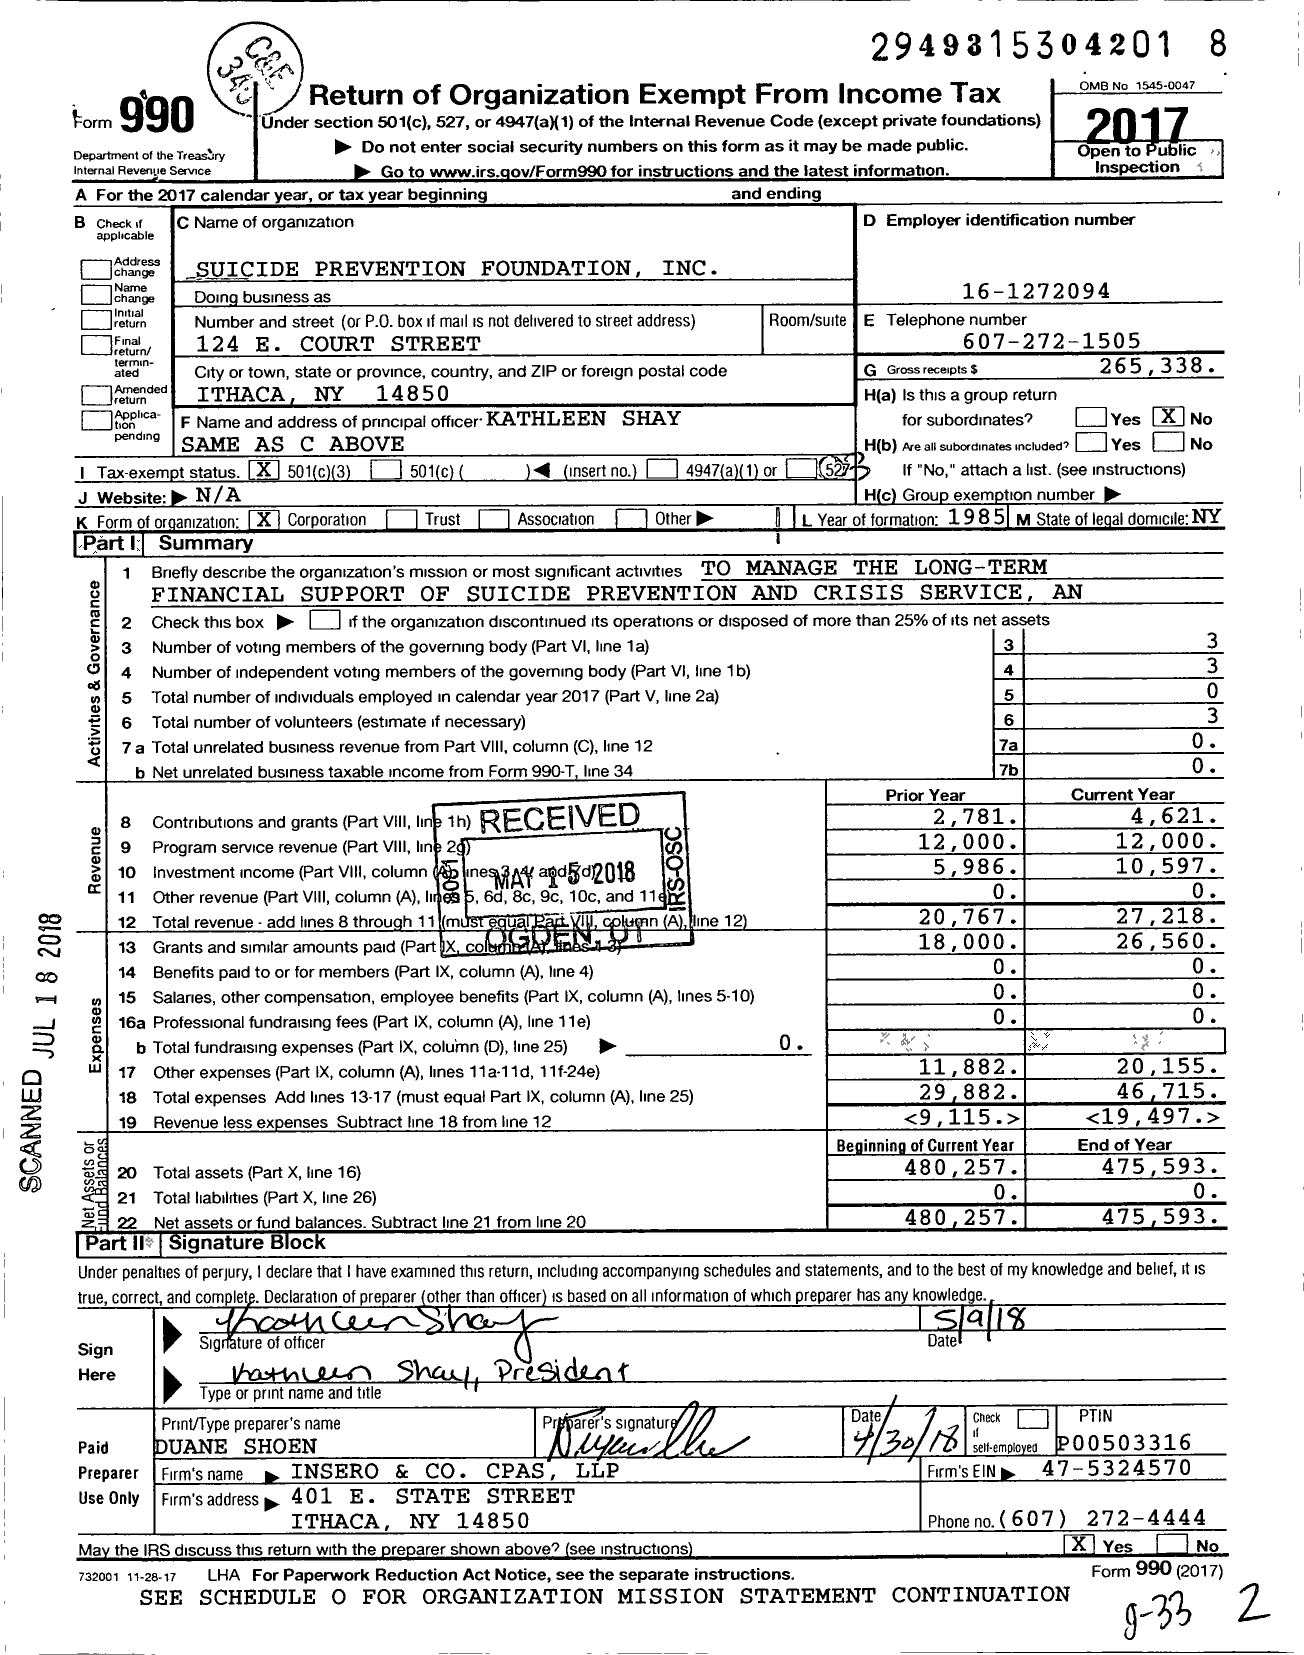 Image of first page of 2017 Form 990 for Suicide Prevention Foundation